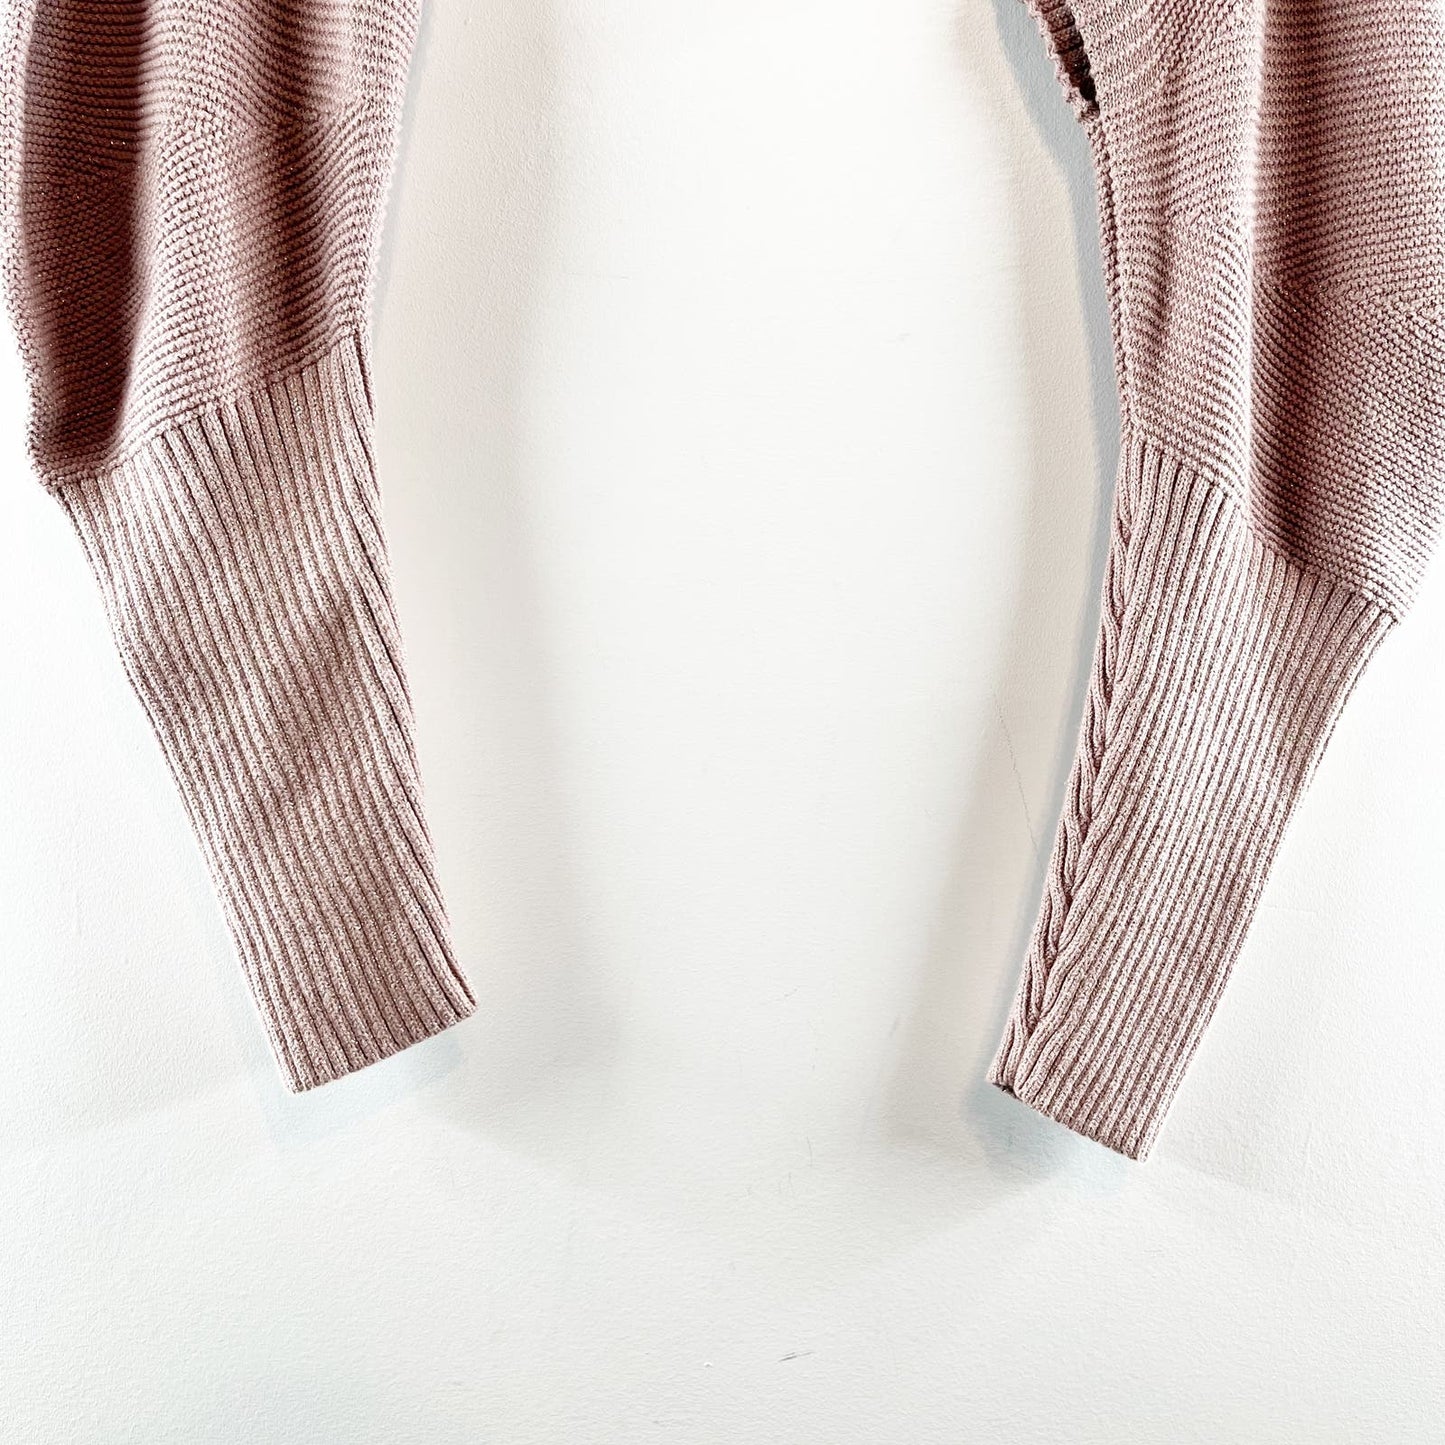 525 Anthropologie Super Cropped Shrug Cardigan Sweater Dusty Pink XS / S